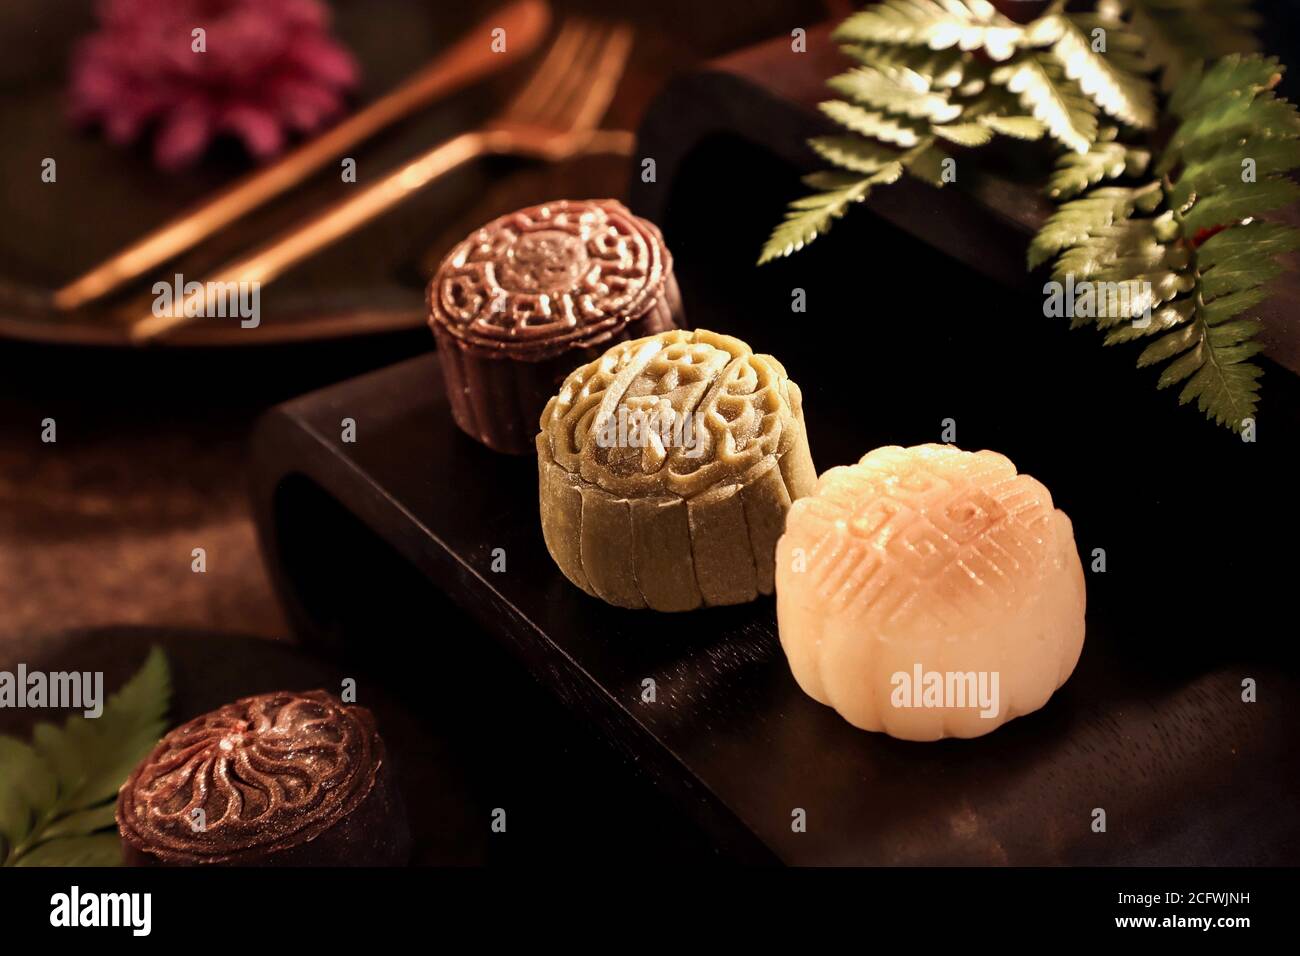 Snowskin or Crystal Skin Mooncake. The new variation of mooncake for Mid-Autumn Festival. Stock Photo